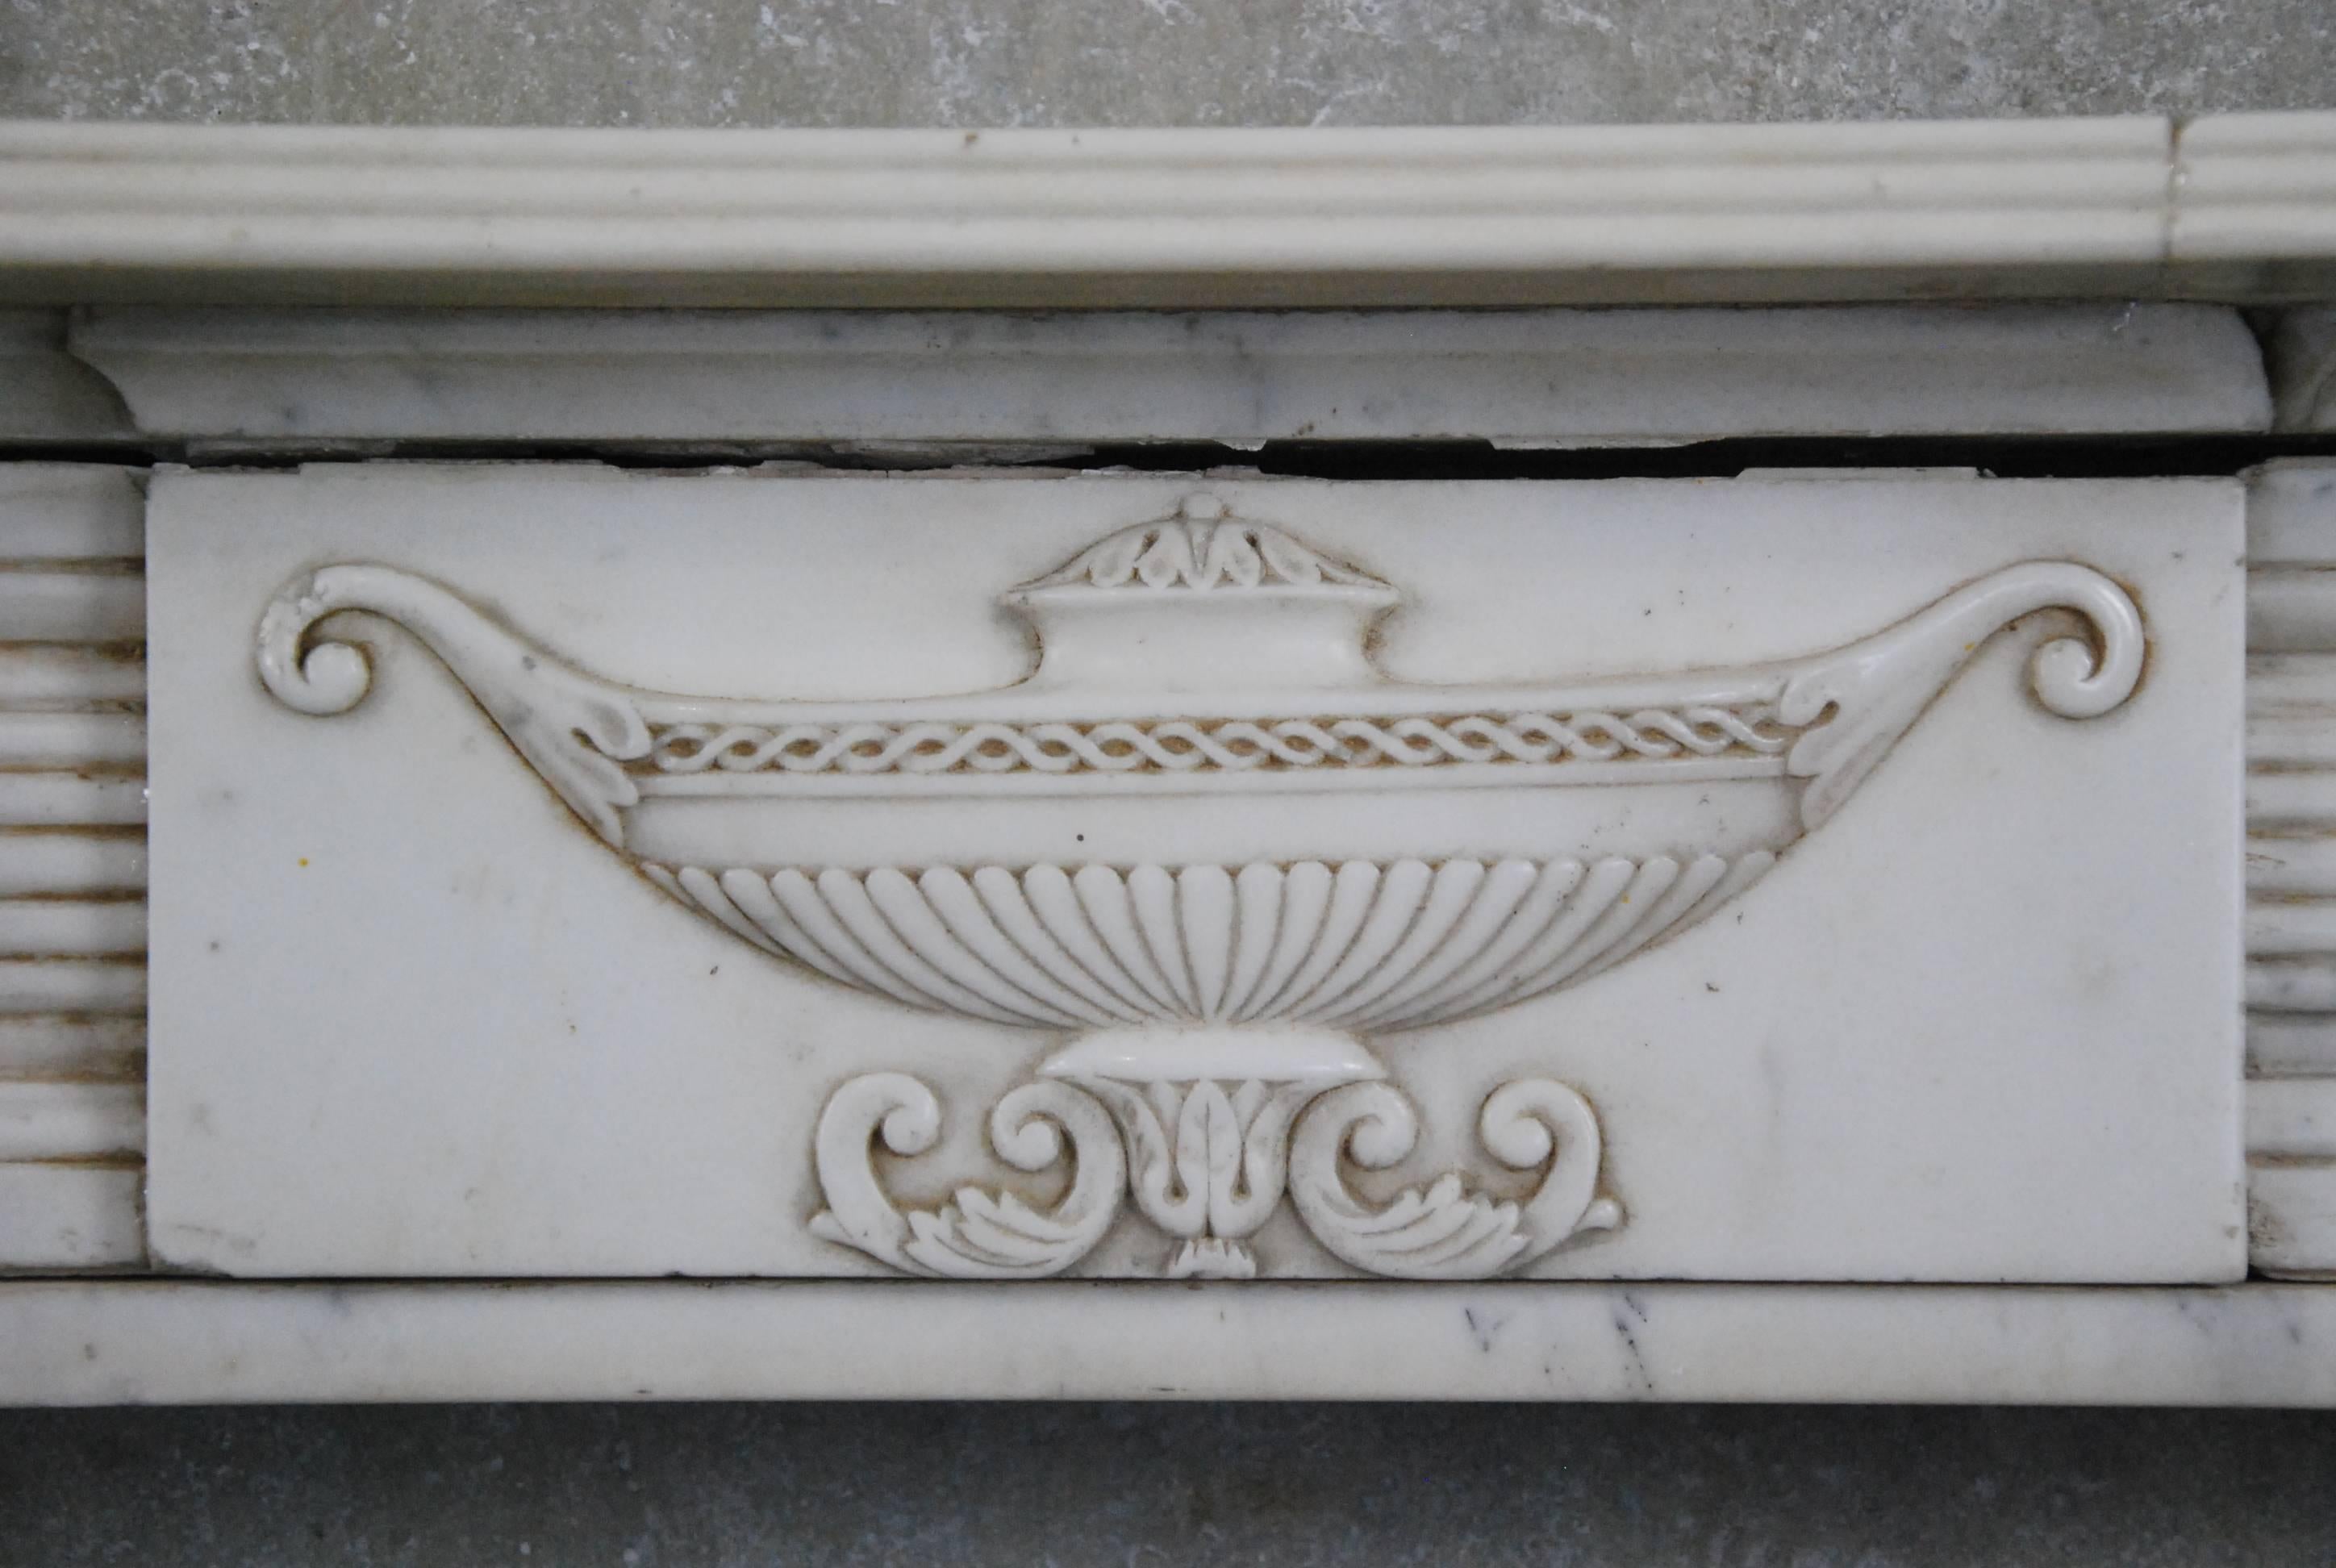 19th century English fireplace surround in Italian Carrara marble. Fluted columns and relief carved centre urn. Recently acquisition from a collection where items were purchased in 1970 in Europe. Very easy install.